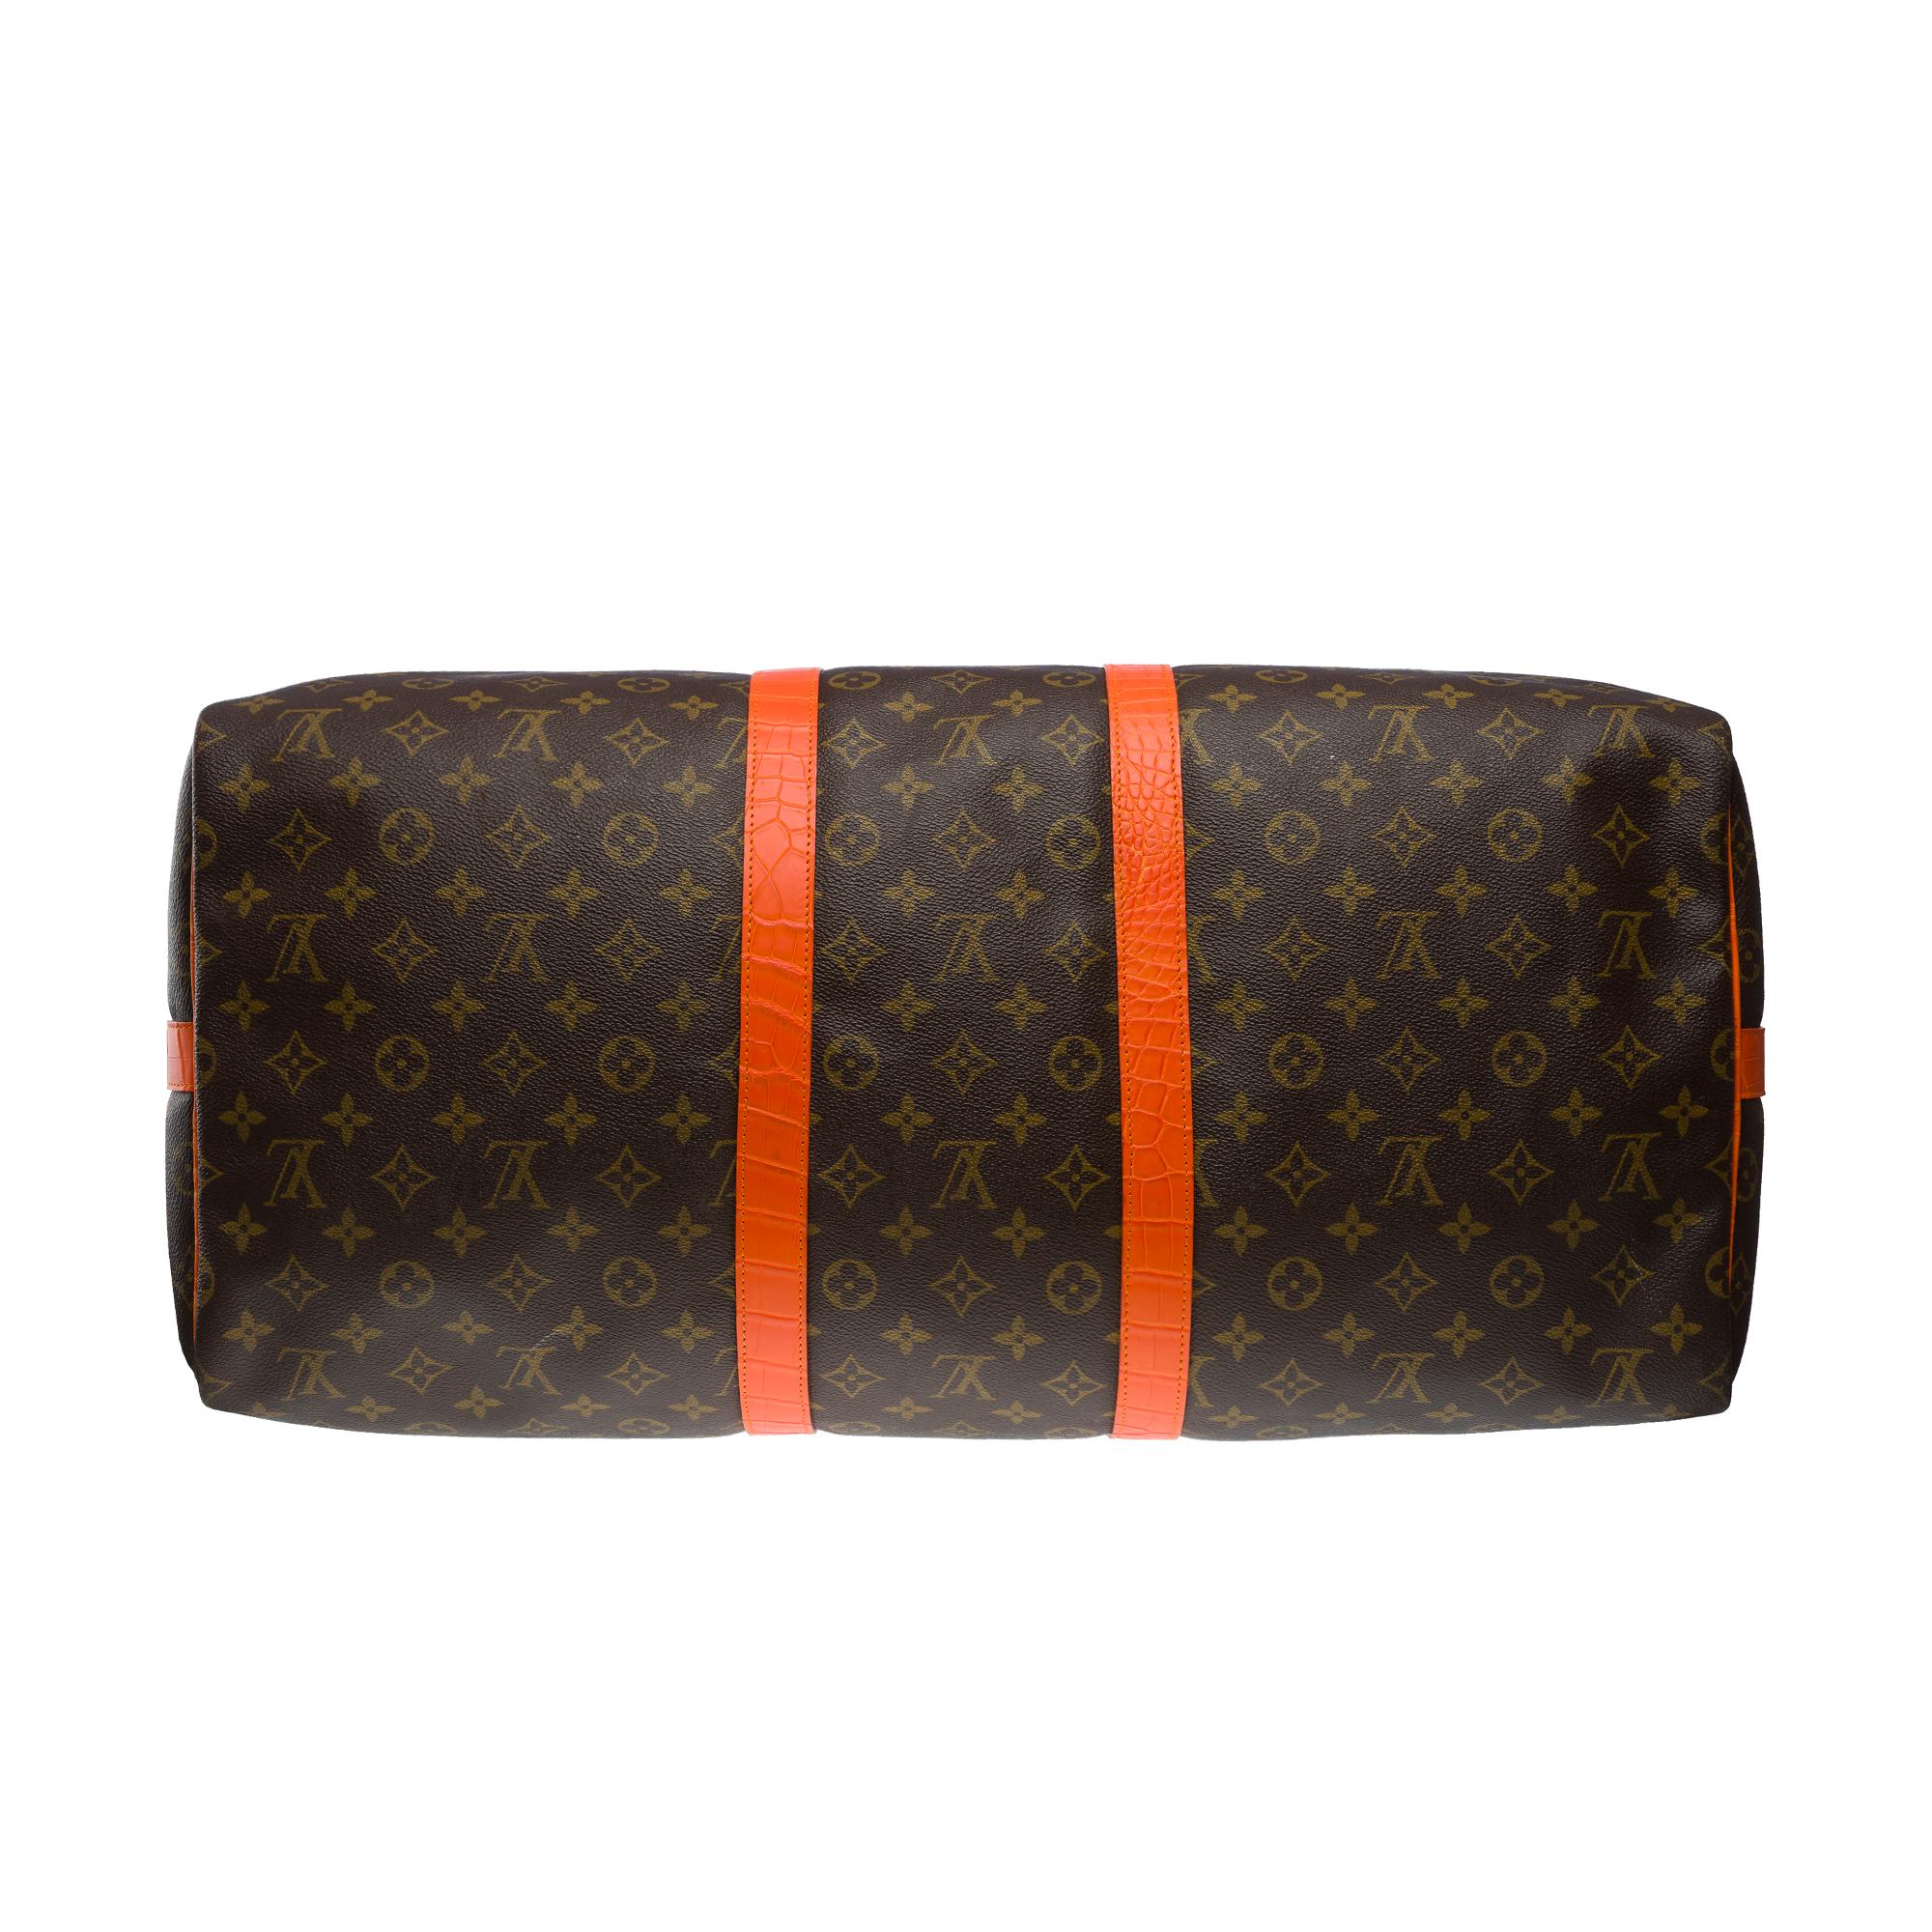 Customized Louis Vuitton Keepall 55 strap Travel bag with Orange Crocodile For Sale 4